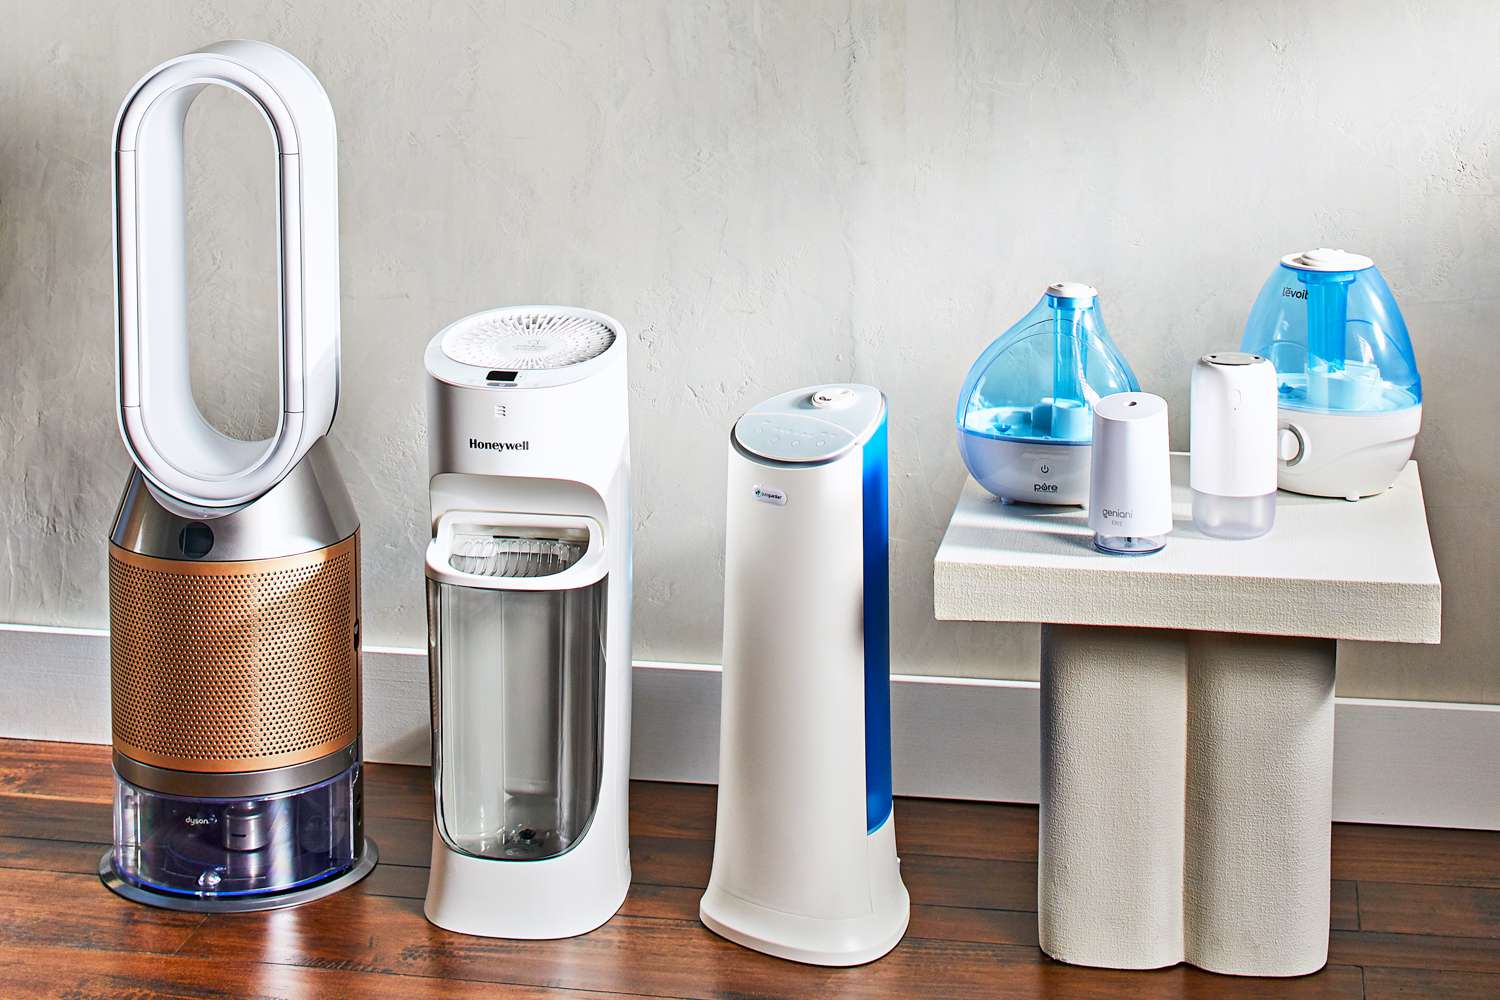 A group of humidifiers in various shapes and sizes